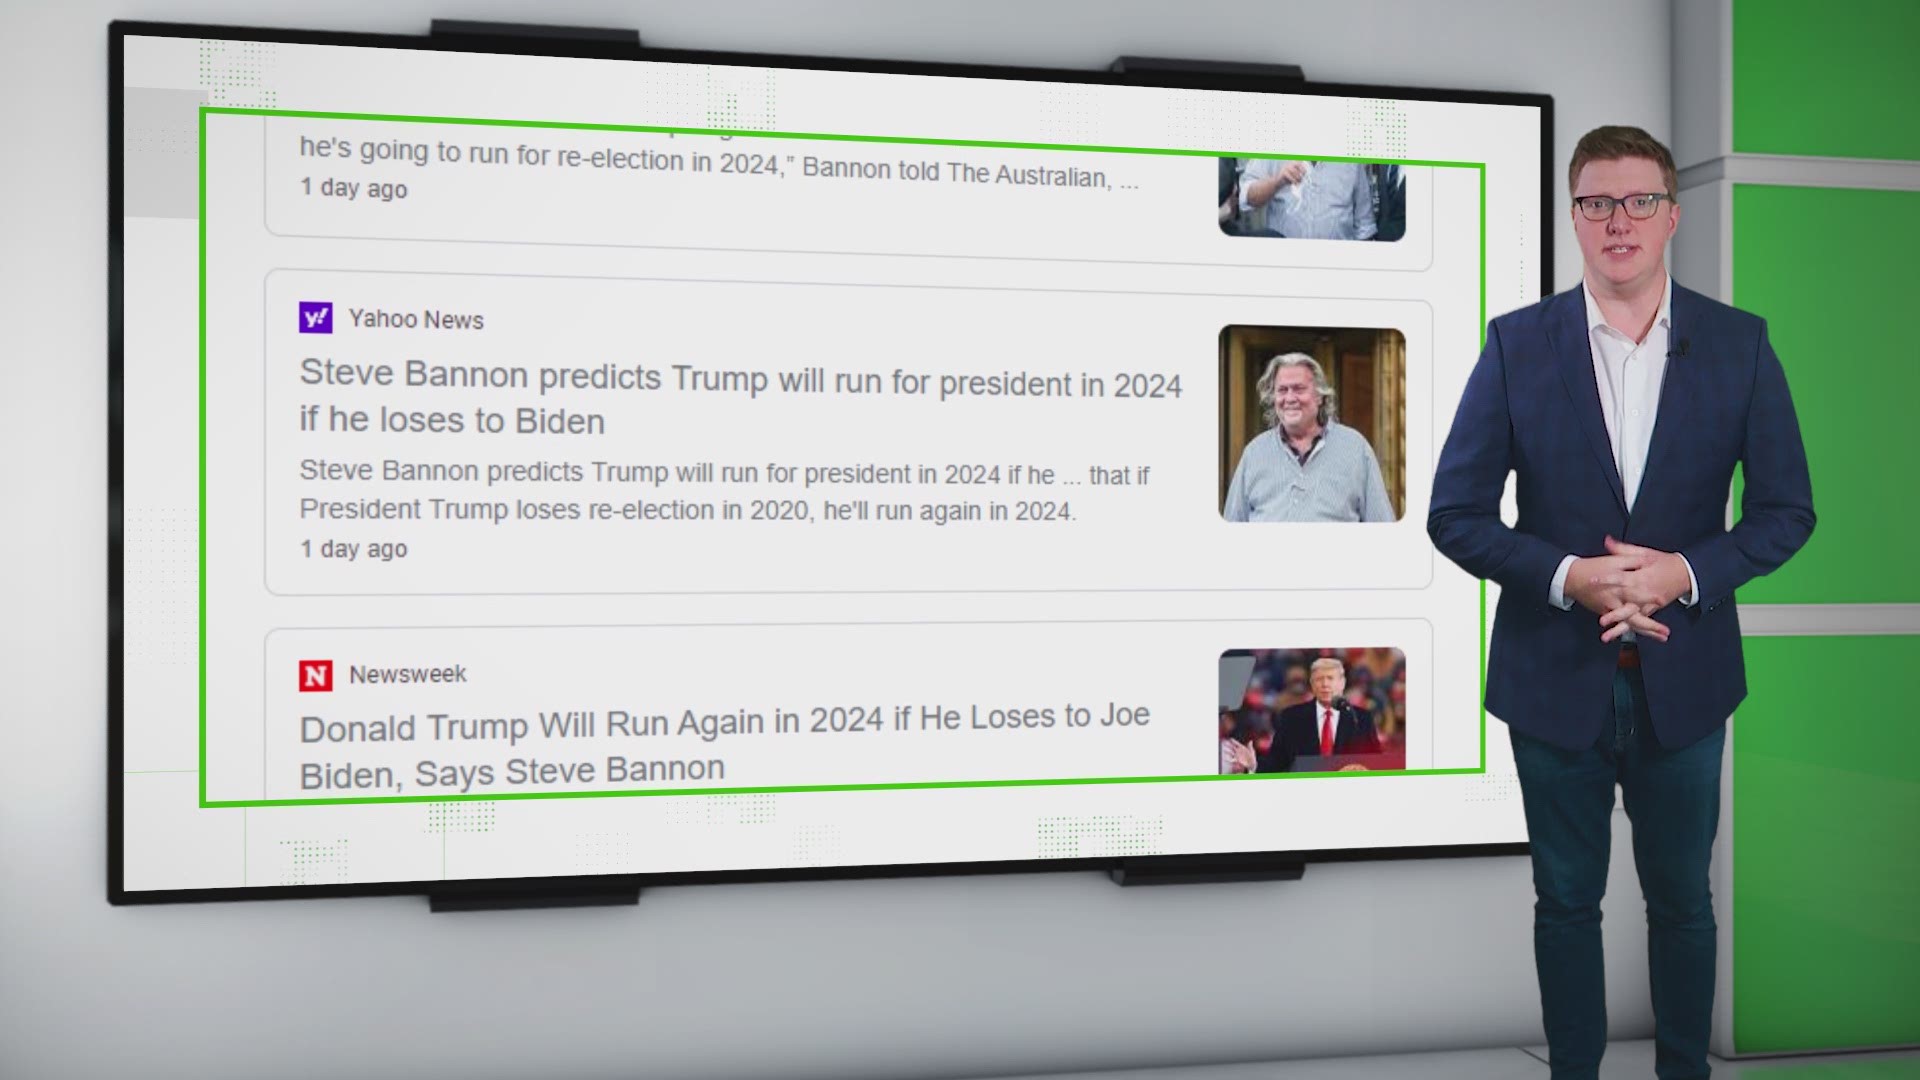 A VERIFY viewer asked the team whether Trump would still be eligible in the next election if he lost in 2020.